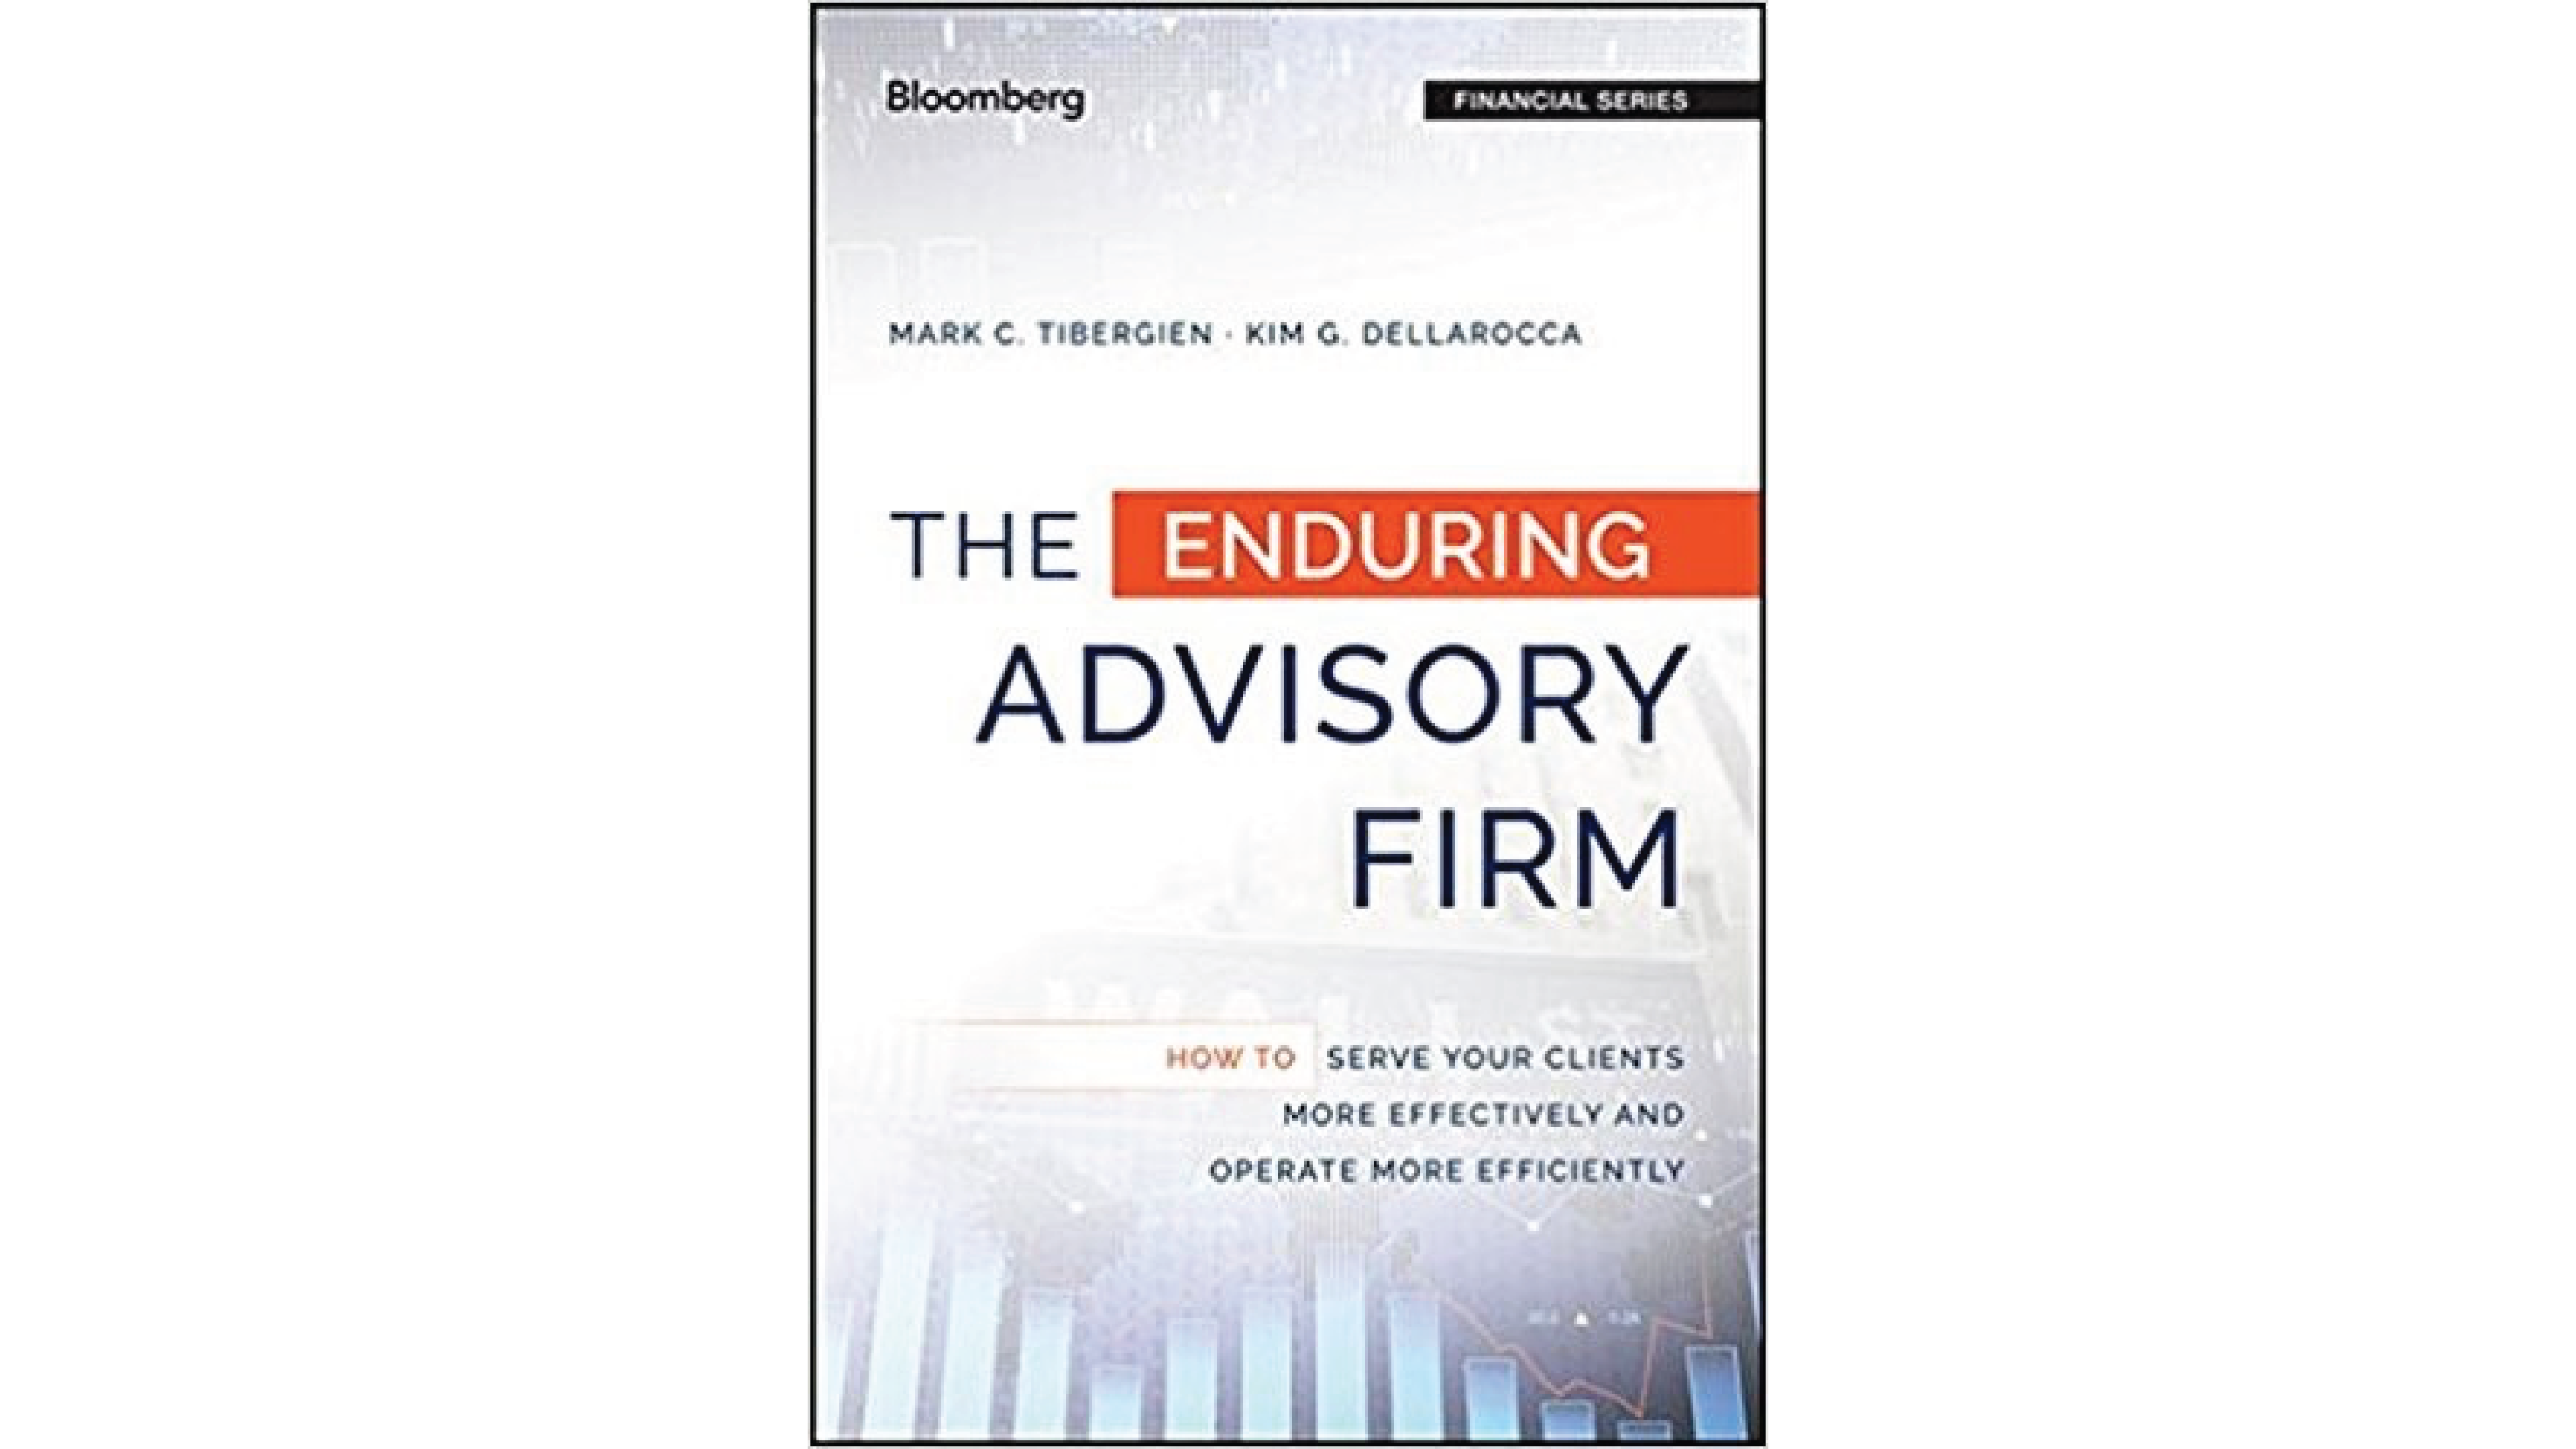 Mark Tibergien’s Latest Book Could Put RIA Consultants Out of Business